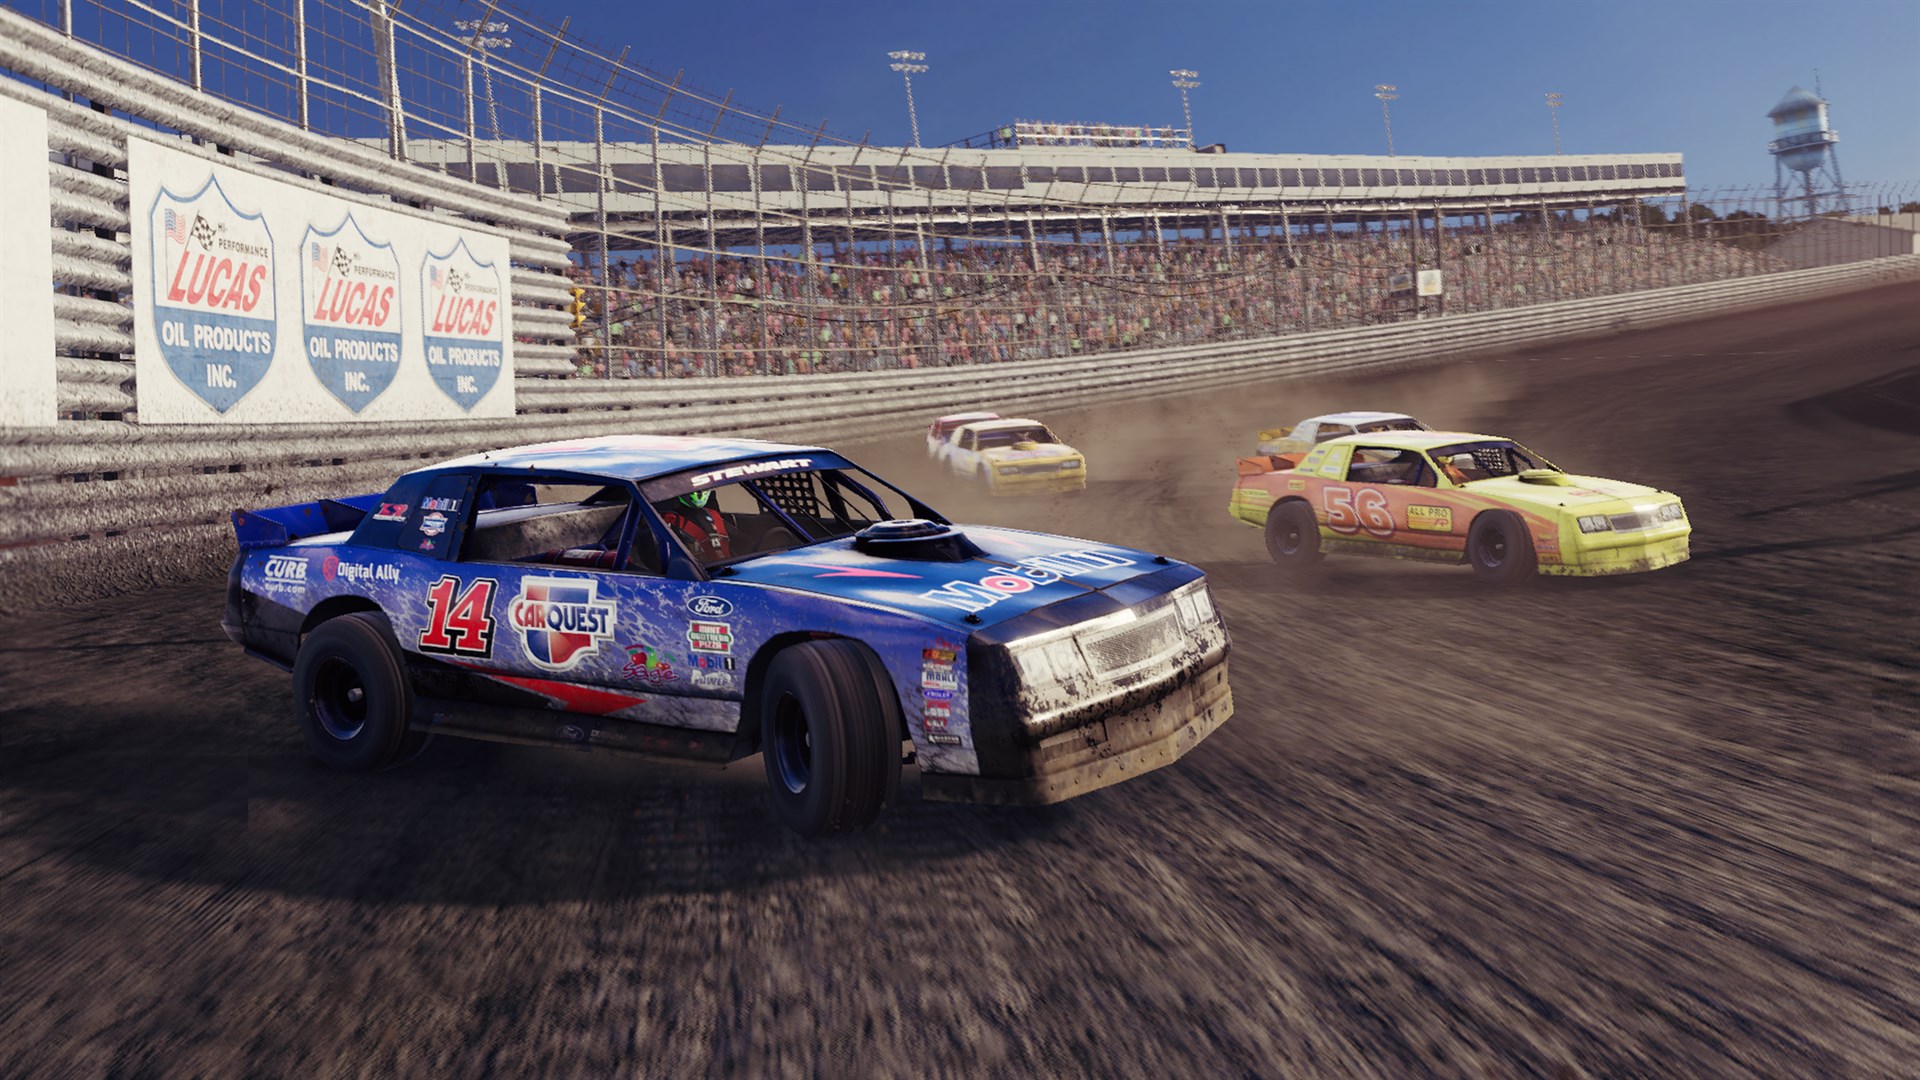 The Knoxville Raceway plays host to Tony Stewarts All-American Racing TheXboxHub